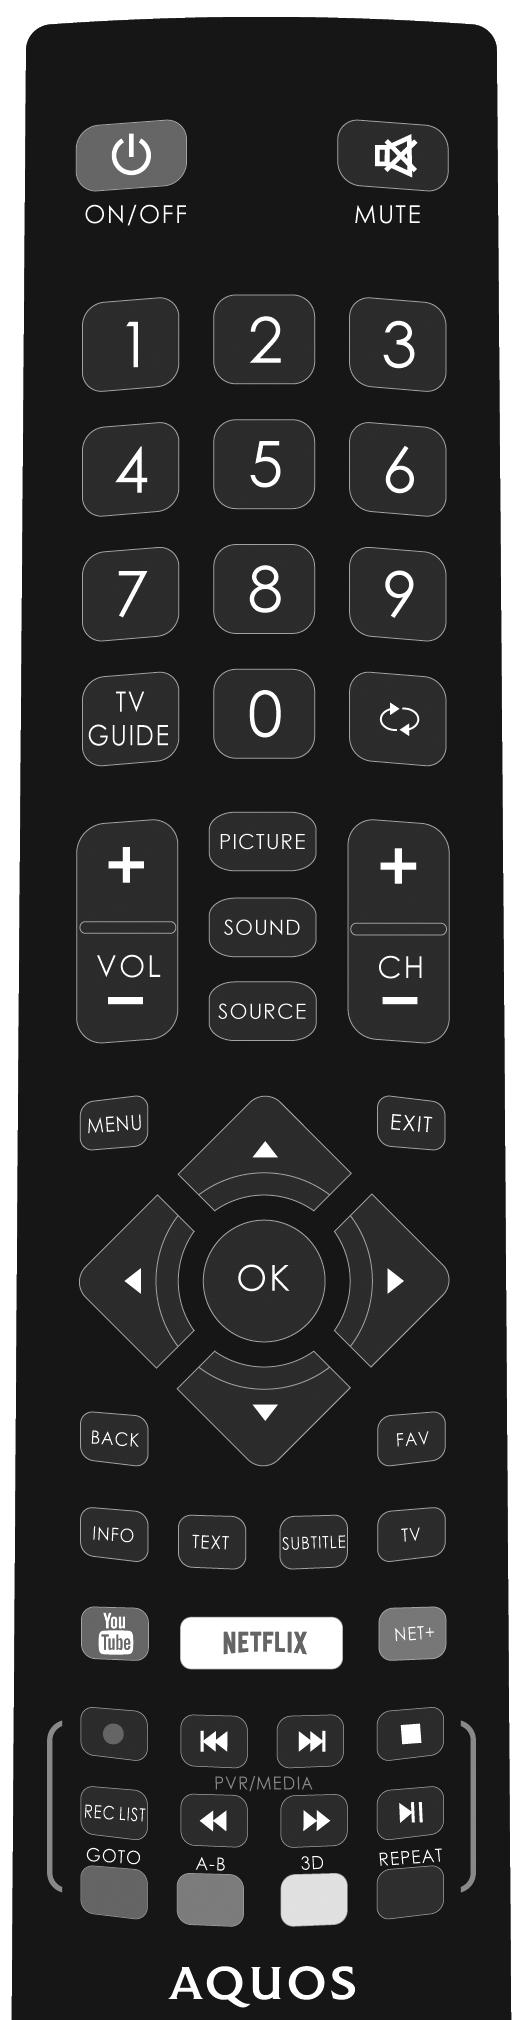 Remote control REMOTE CONTROL Key 1 2 For models with integrated DVD players. For models with PVR Function. For models with USB Playback. For models with 3D functions.